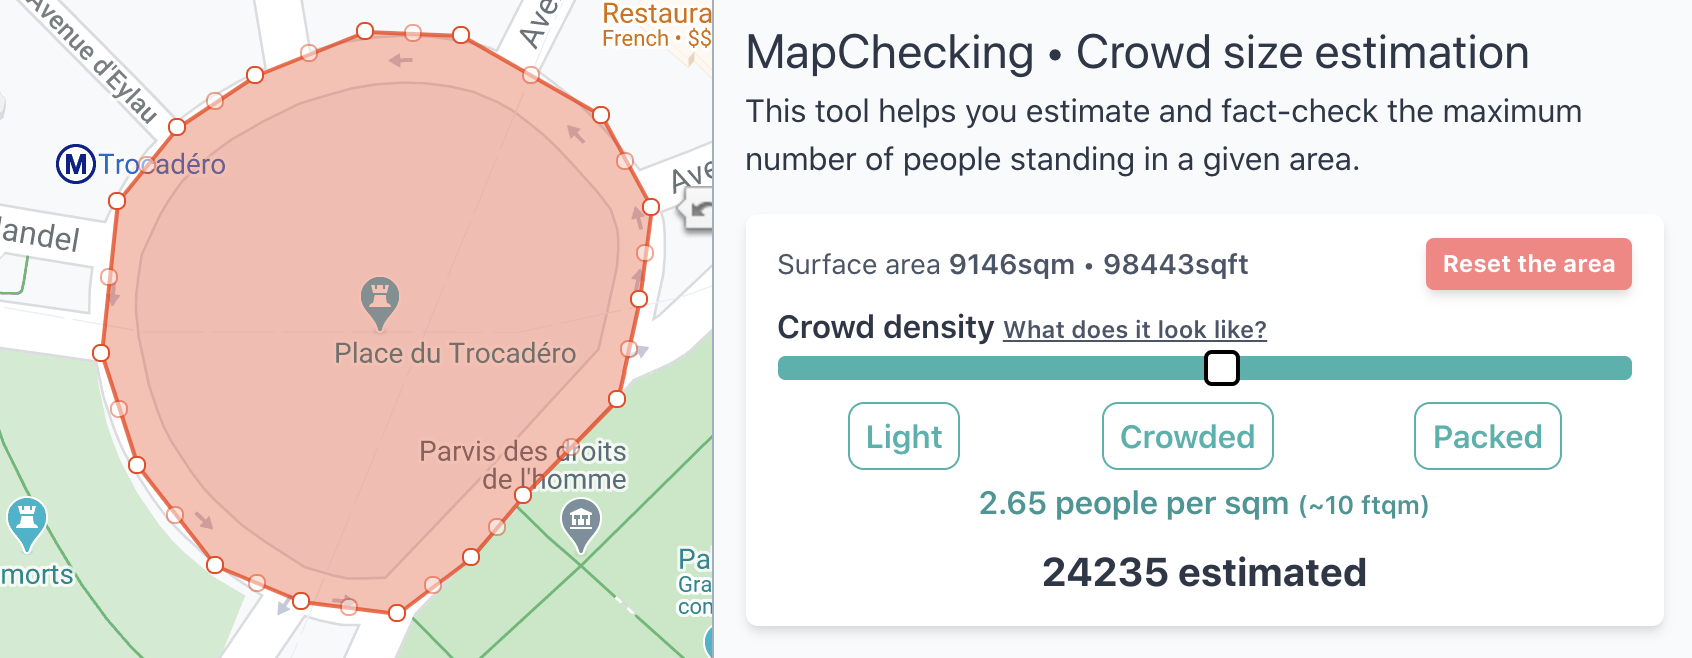 MapChecking - Crowd counting tool